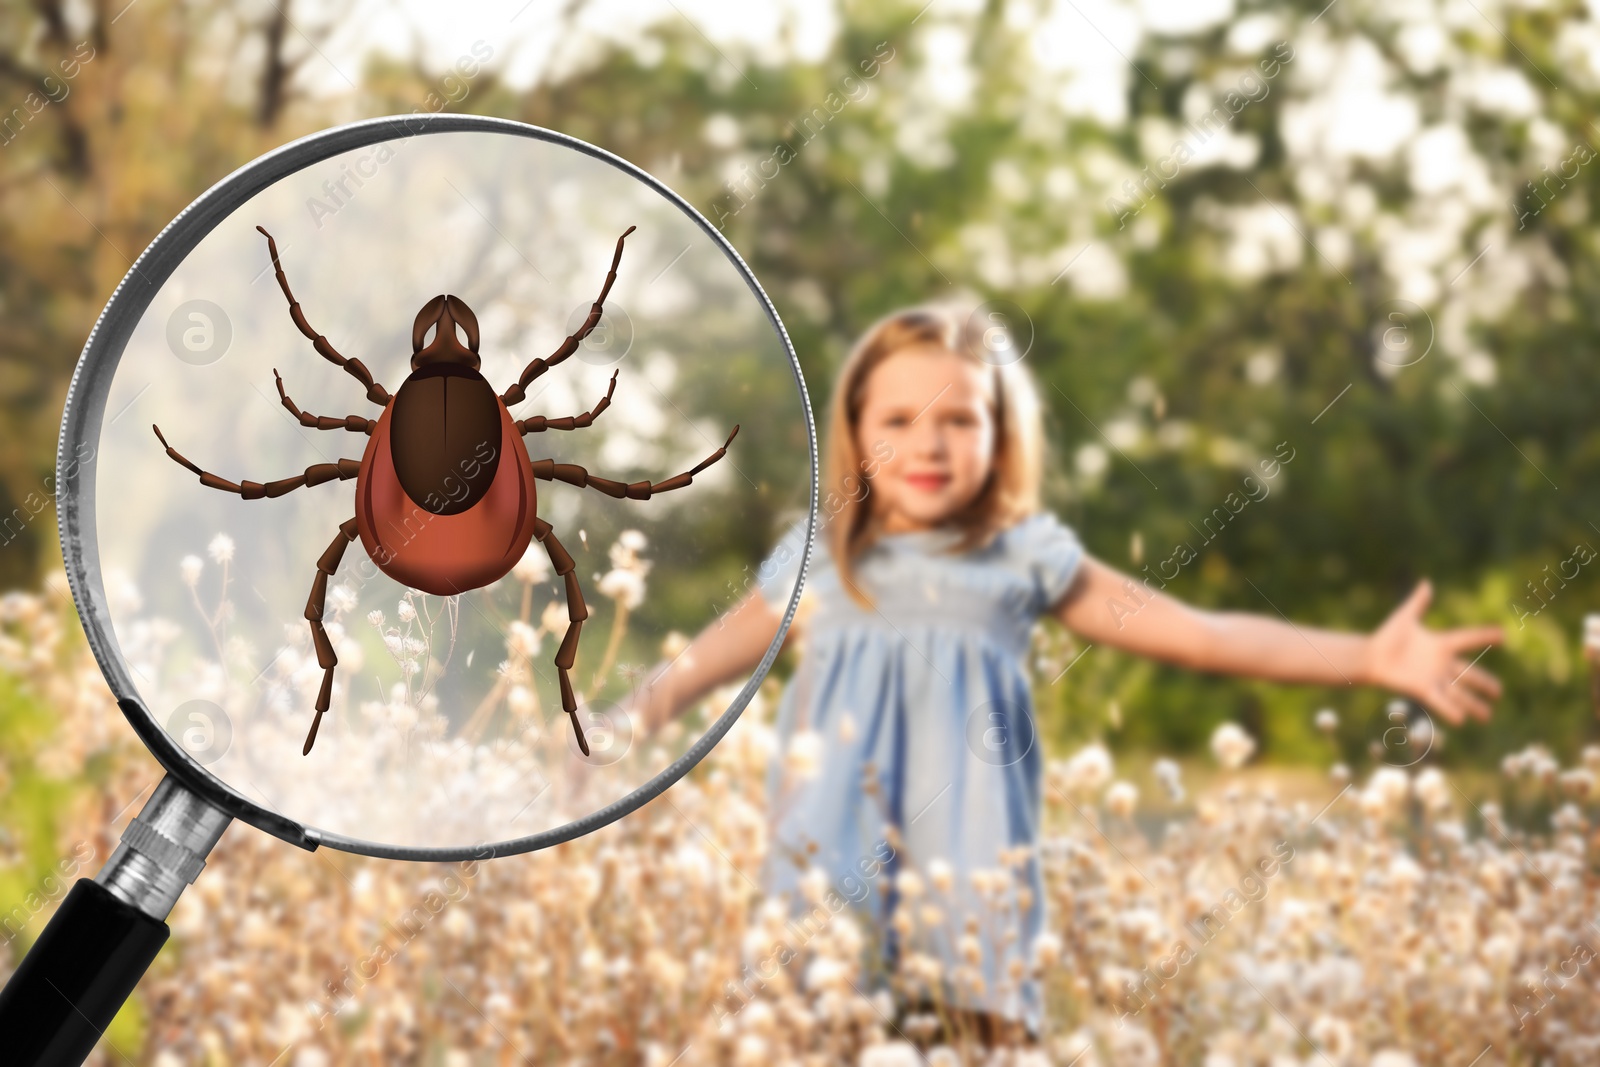 Image of Seasonal hazard of outdoor recreation. Girl playing in nature. Illustration of magnifying glass with tick, selective focus